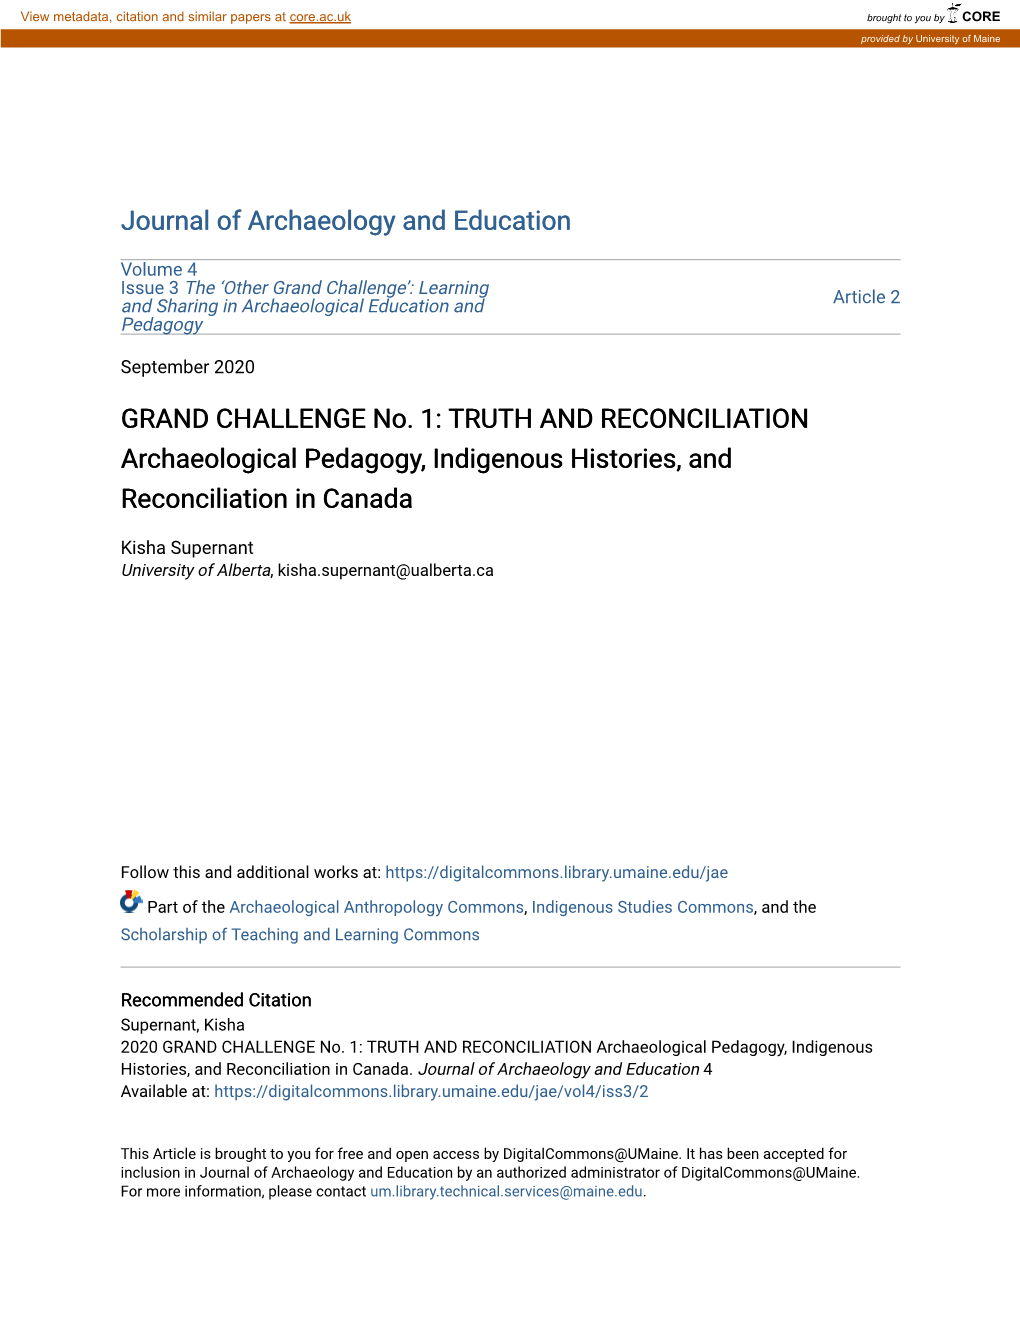 TRUTH and RECONCILIATION Archaeological Pedagogy, Indigenous Histories, and Reconciliation in Canada